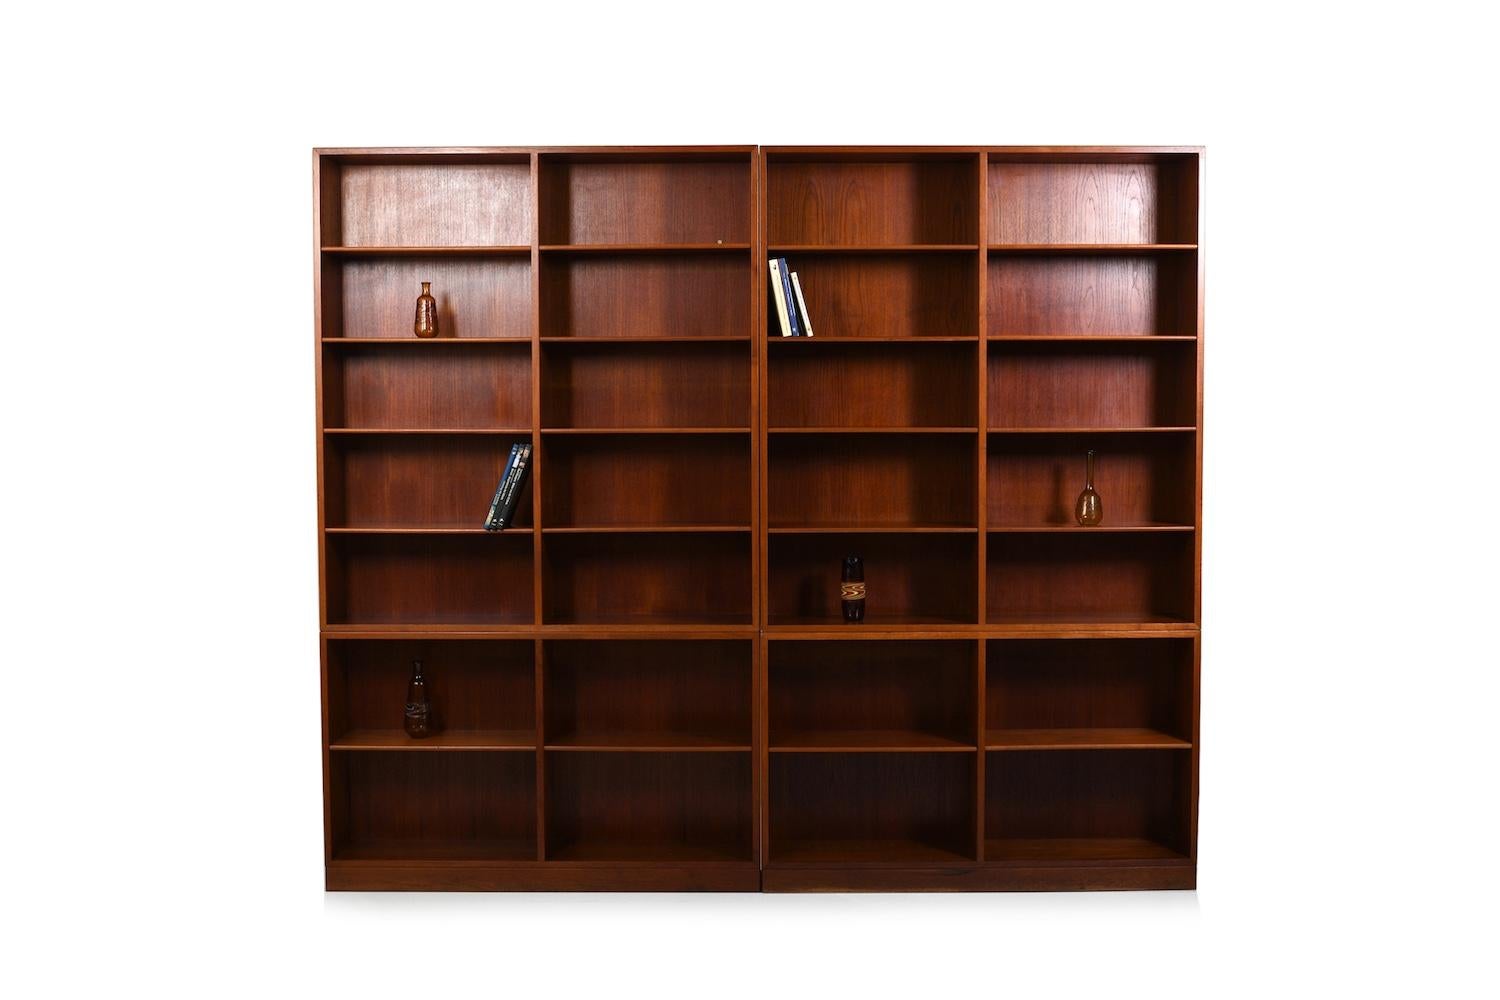 Large book case system,  model no.152 by Børge Mogensen for FDB Møbler. Made in teak. He designed his China Series in 1960s. Produced i1960s. Nice patina and teak color.

Note: Please have a look on the matching cabinets and l book cases in our